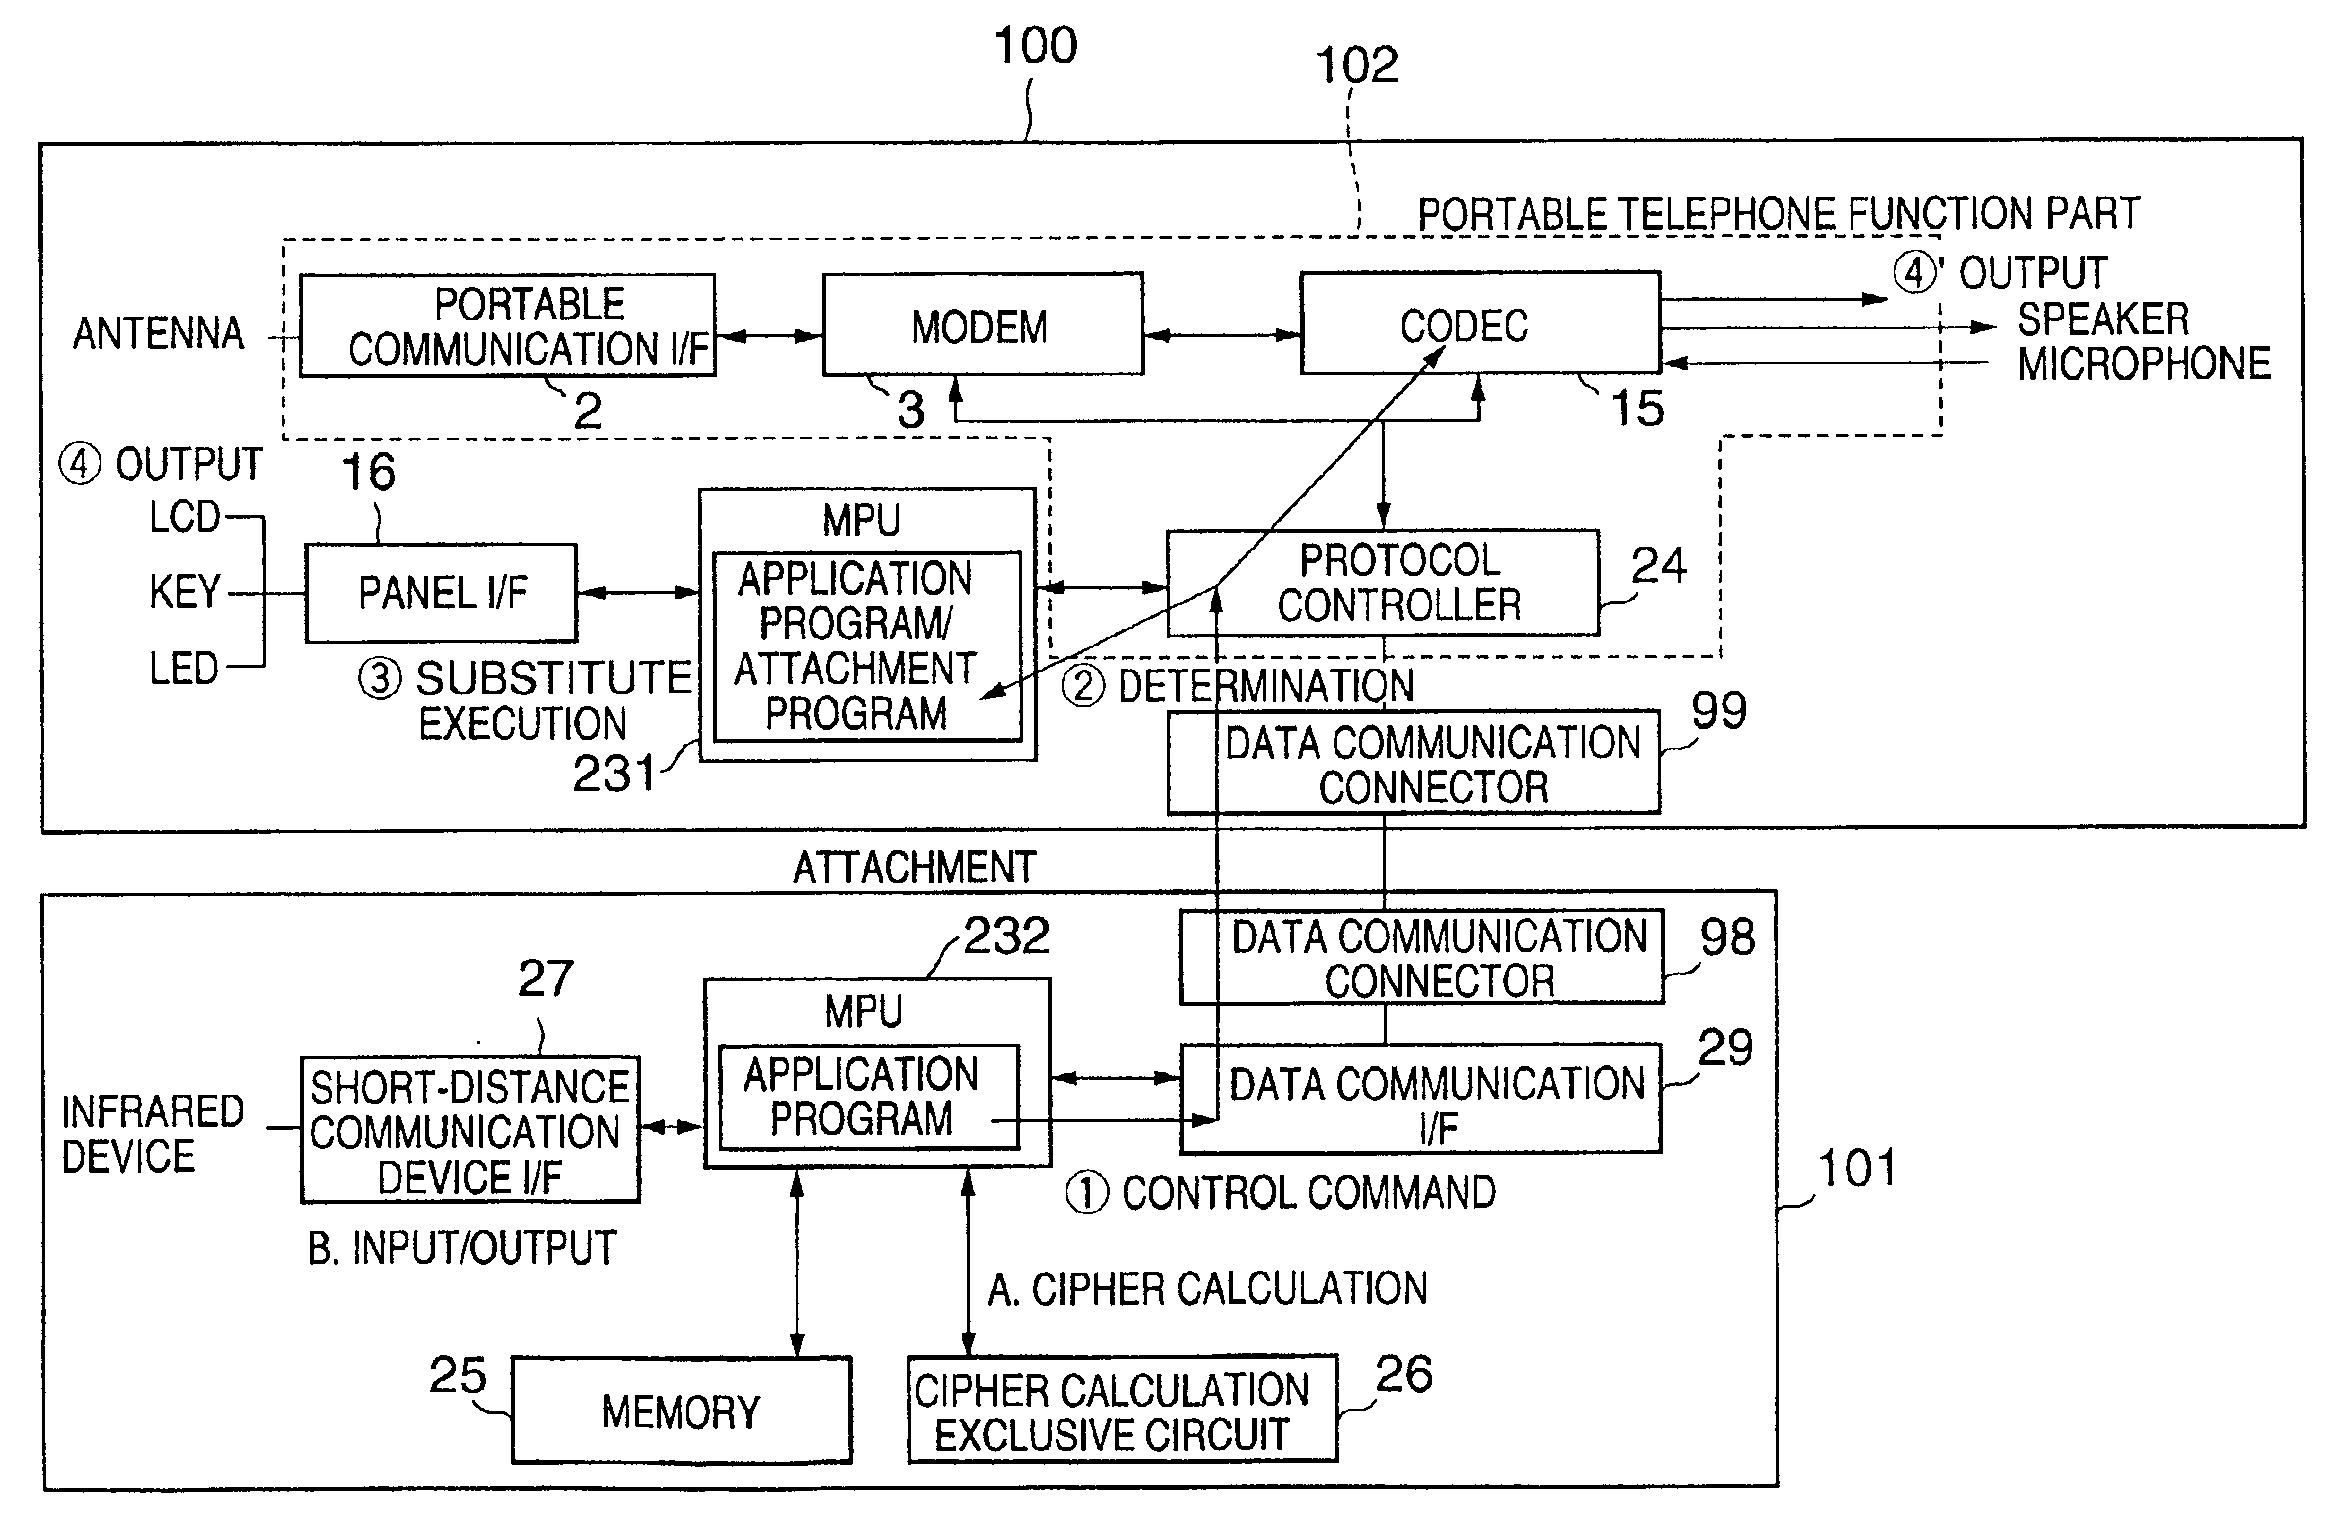 Portable communication device and system using the portable communication device and attachment for a portable communication device